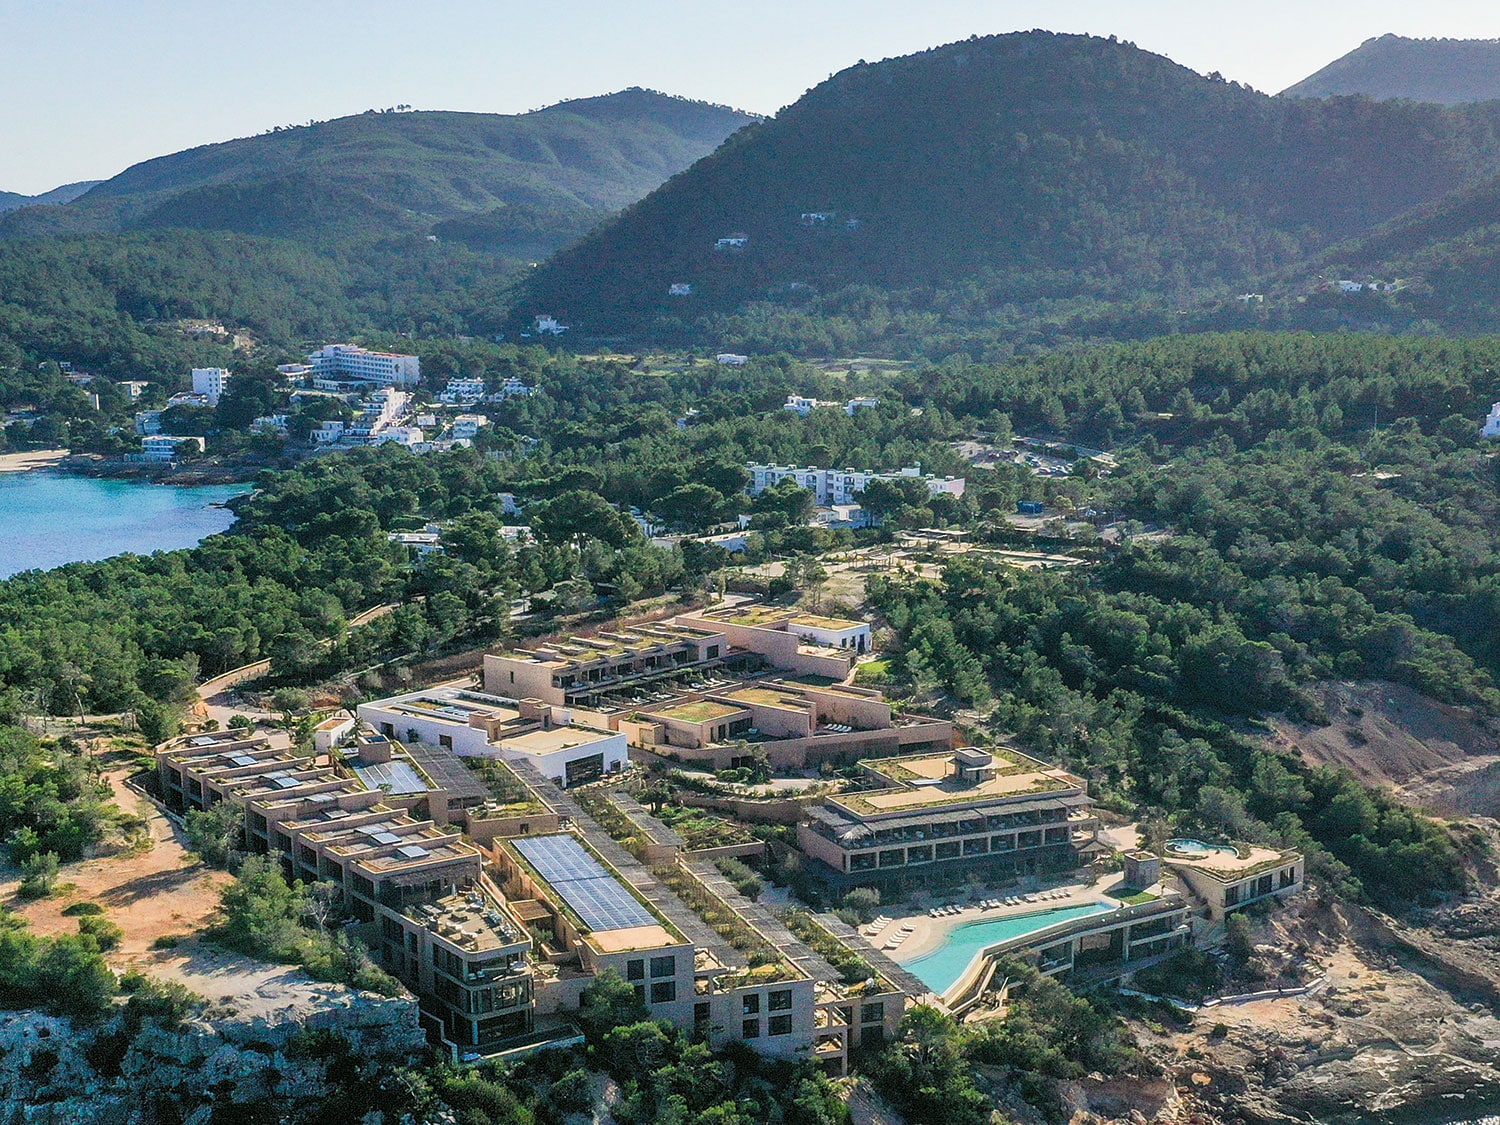 An aerial view of the Six Senses Ibiza resort in the Balearic Islands, Spain.